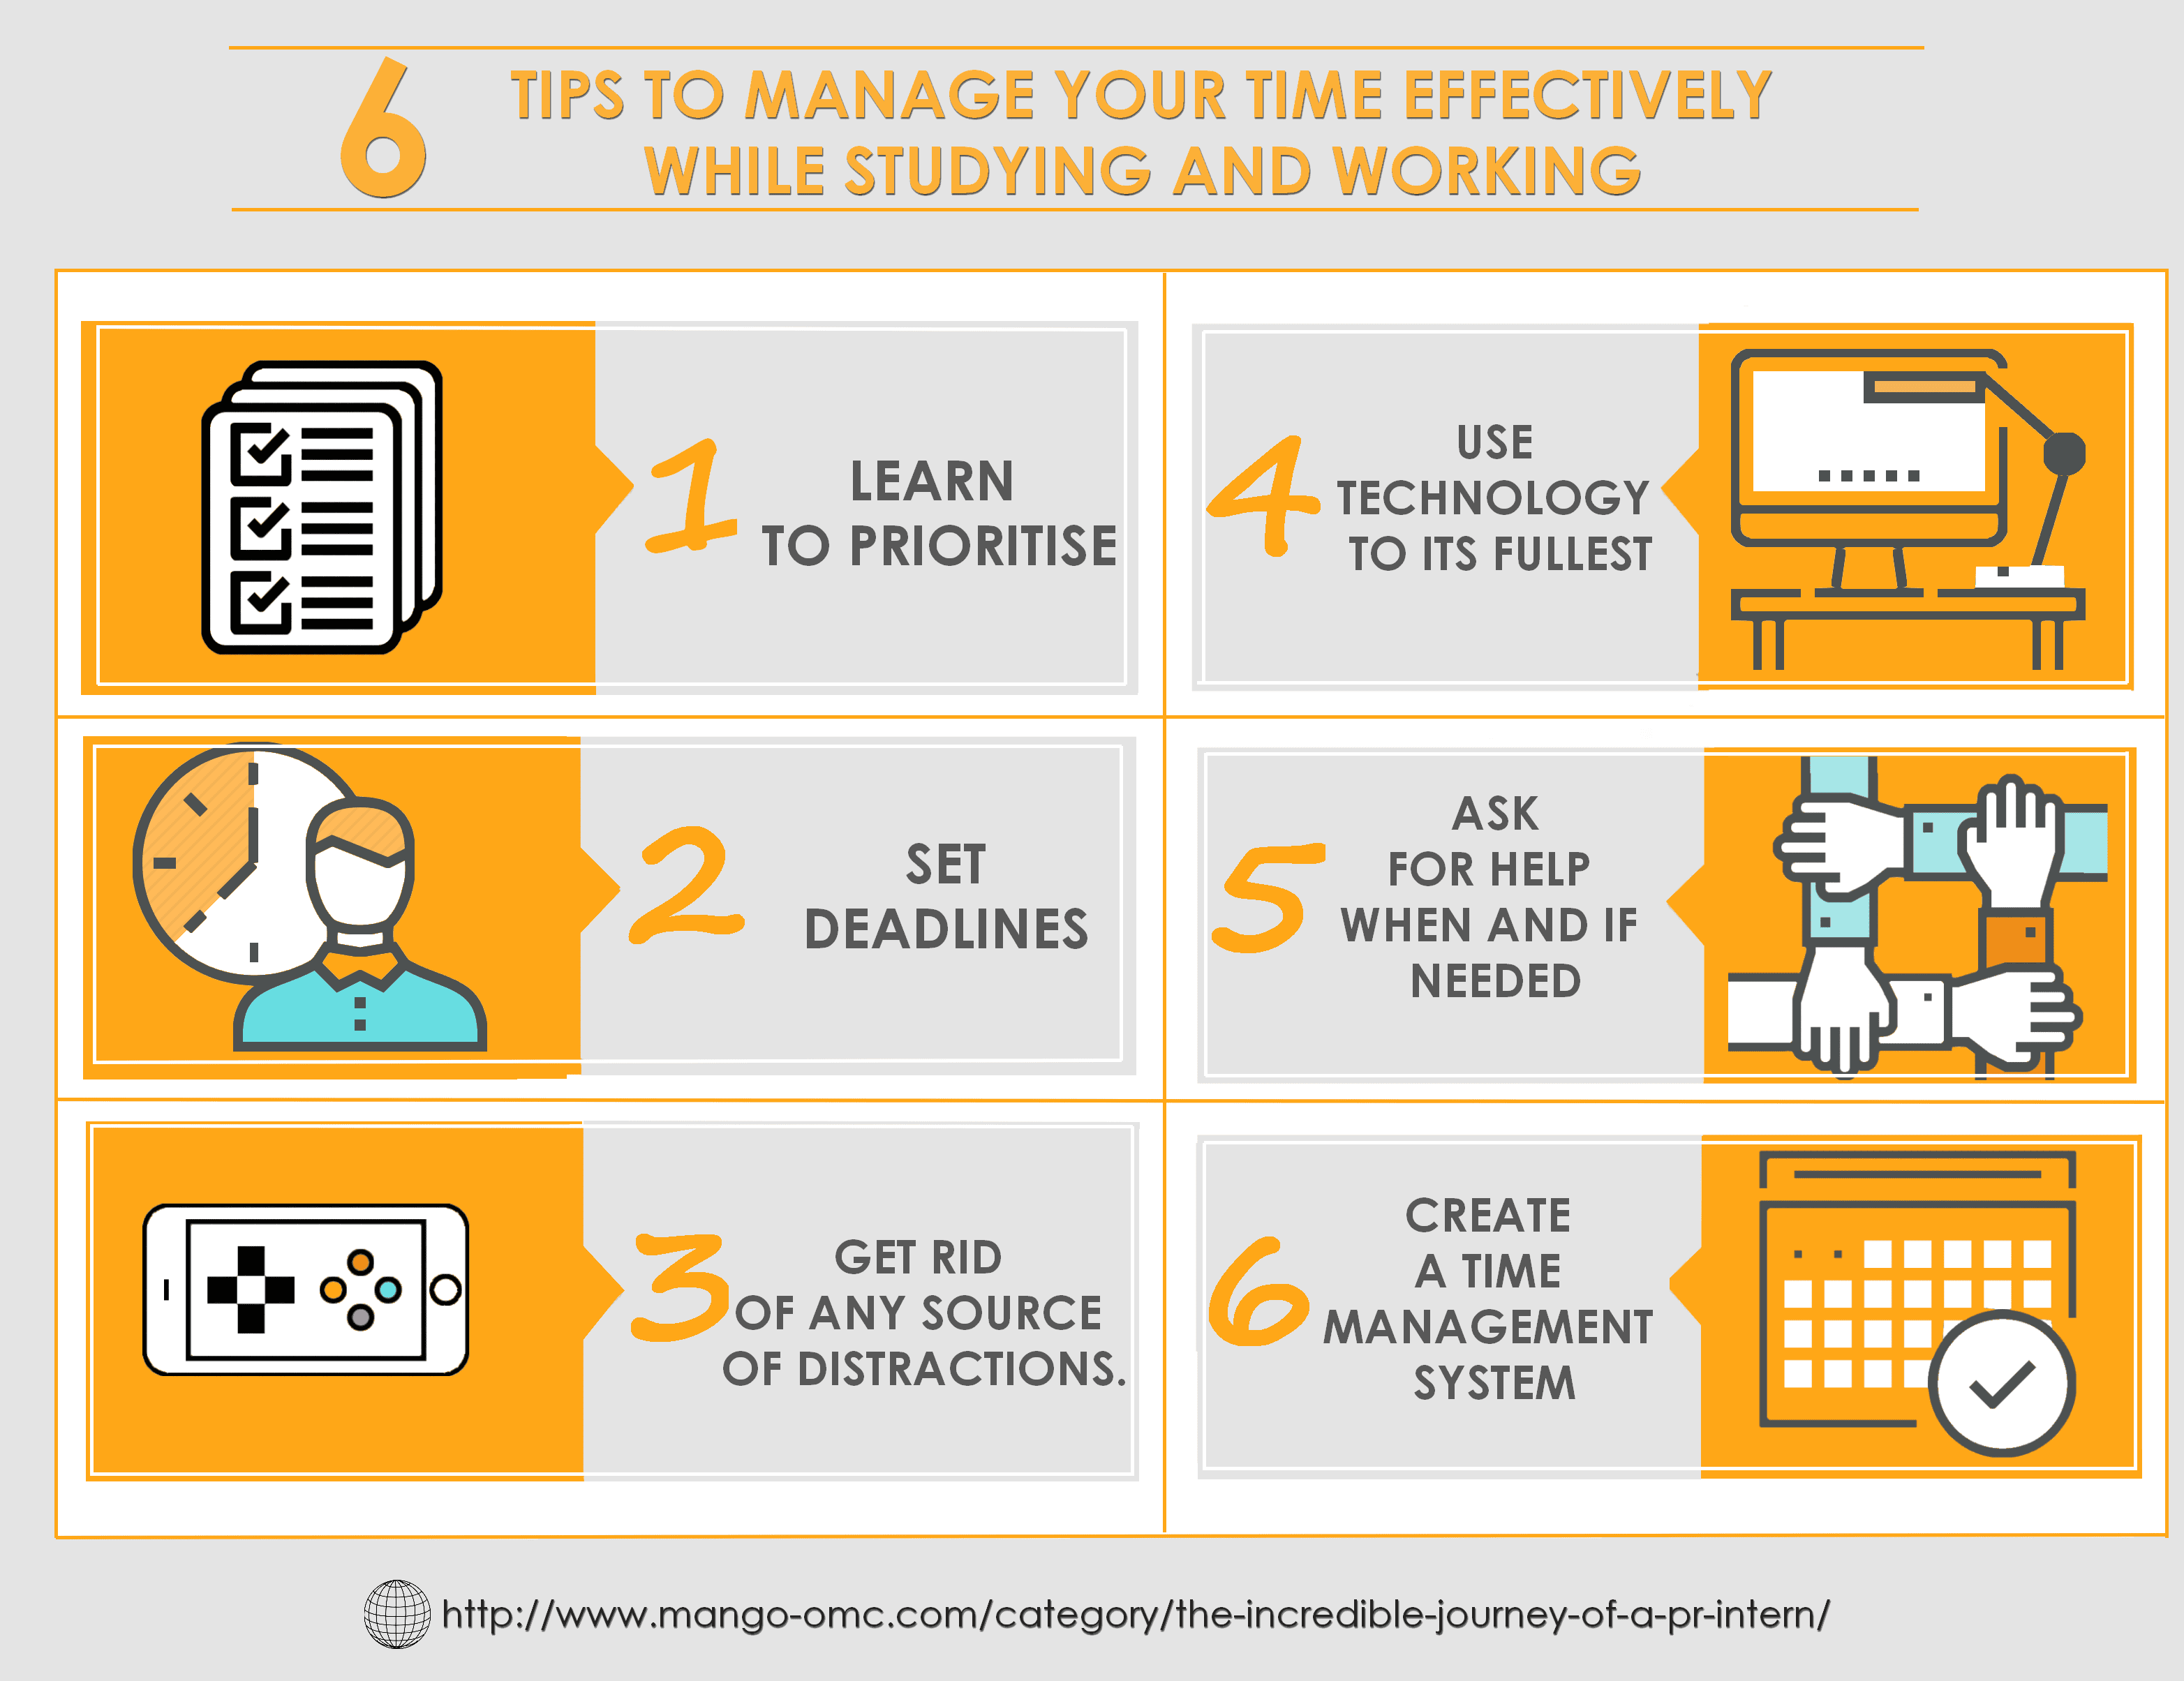 6 Tips To Manage Your Time Effectively While Studying And Working